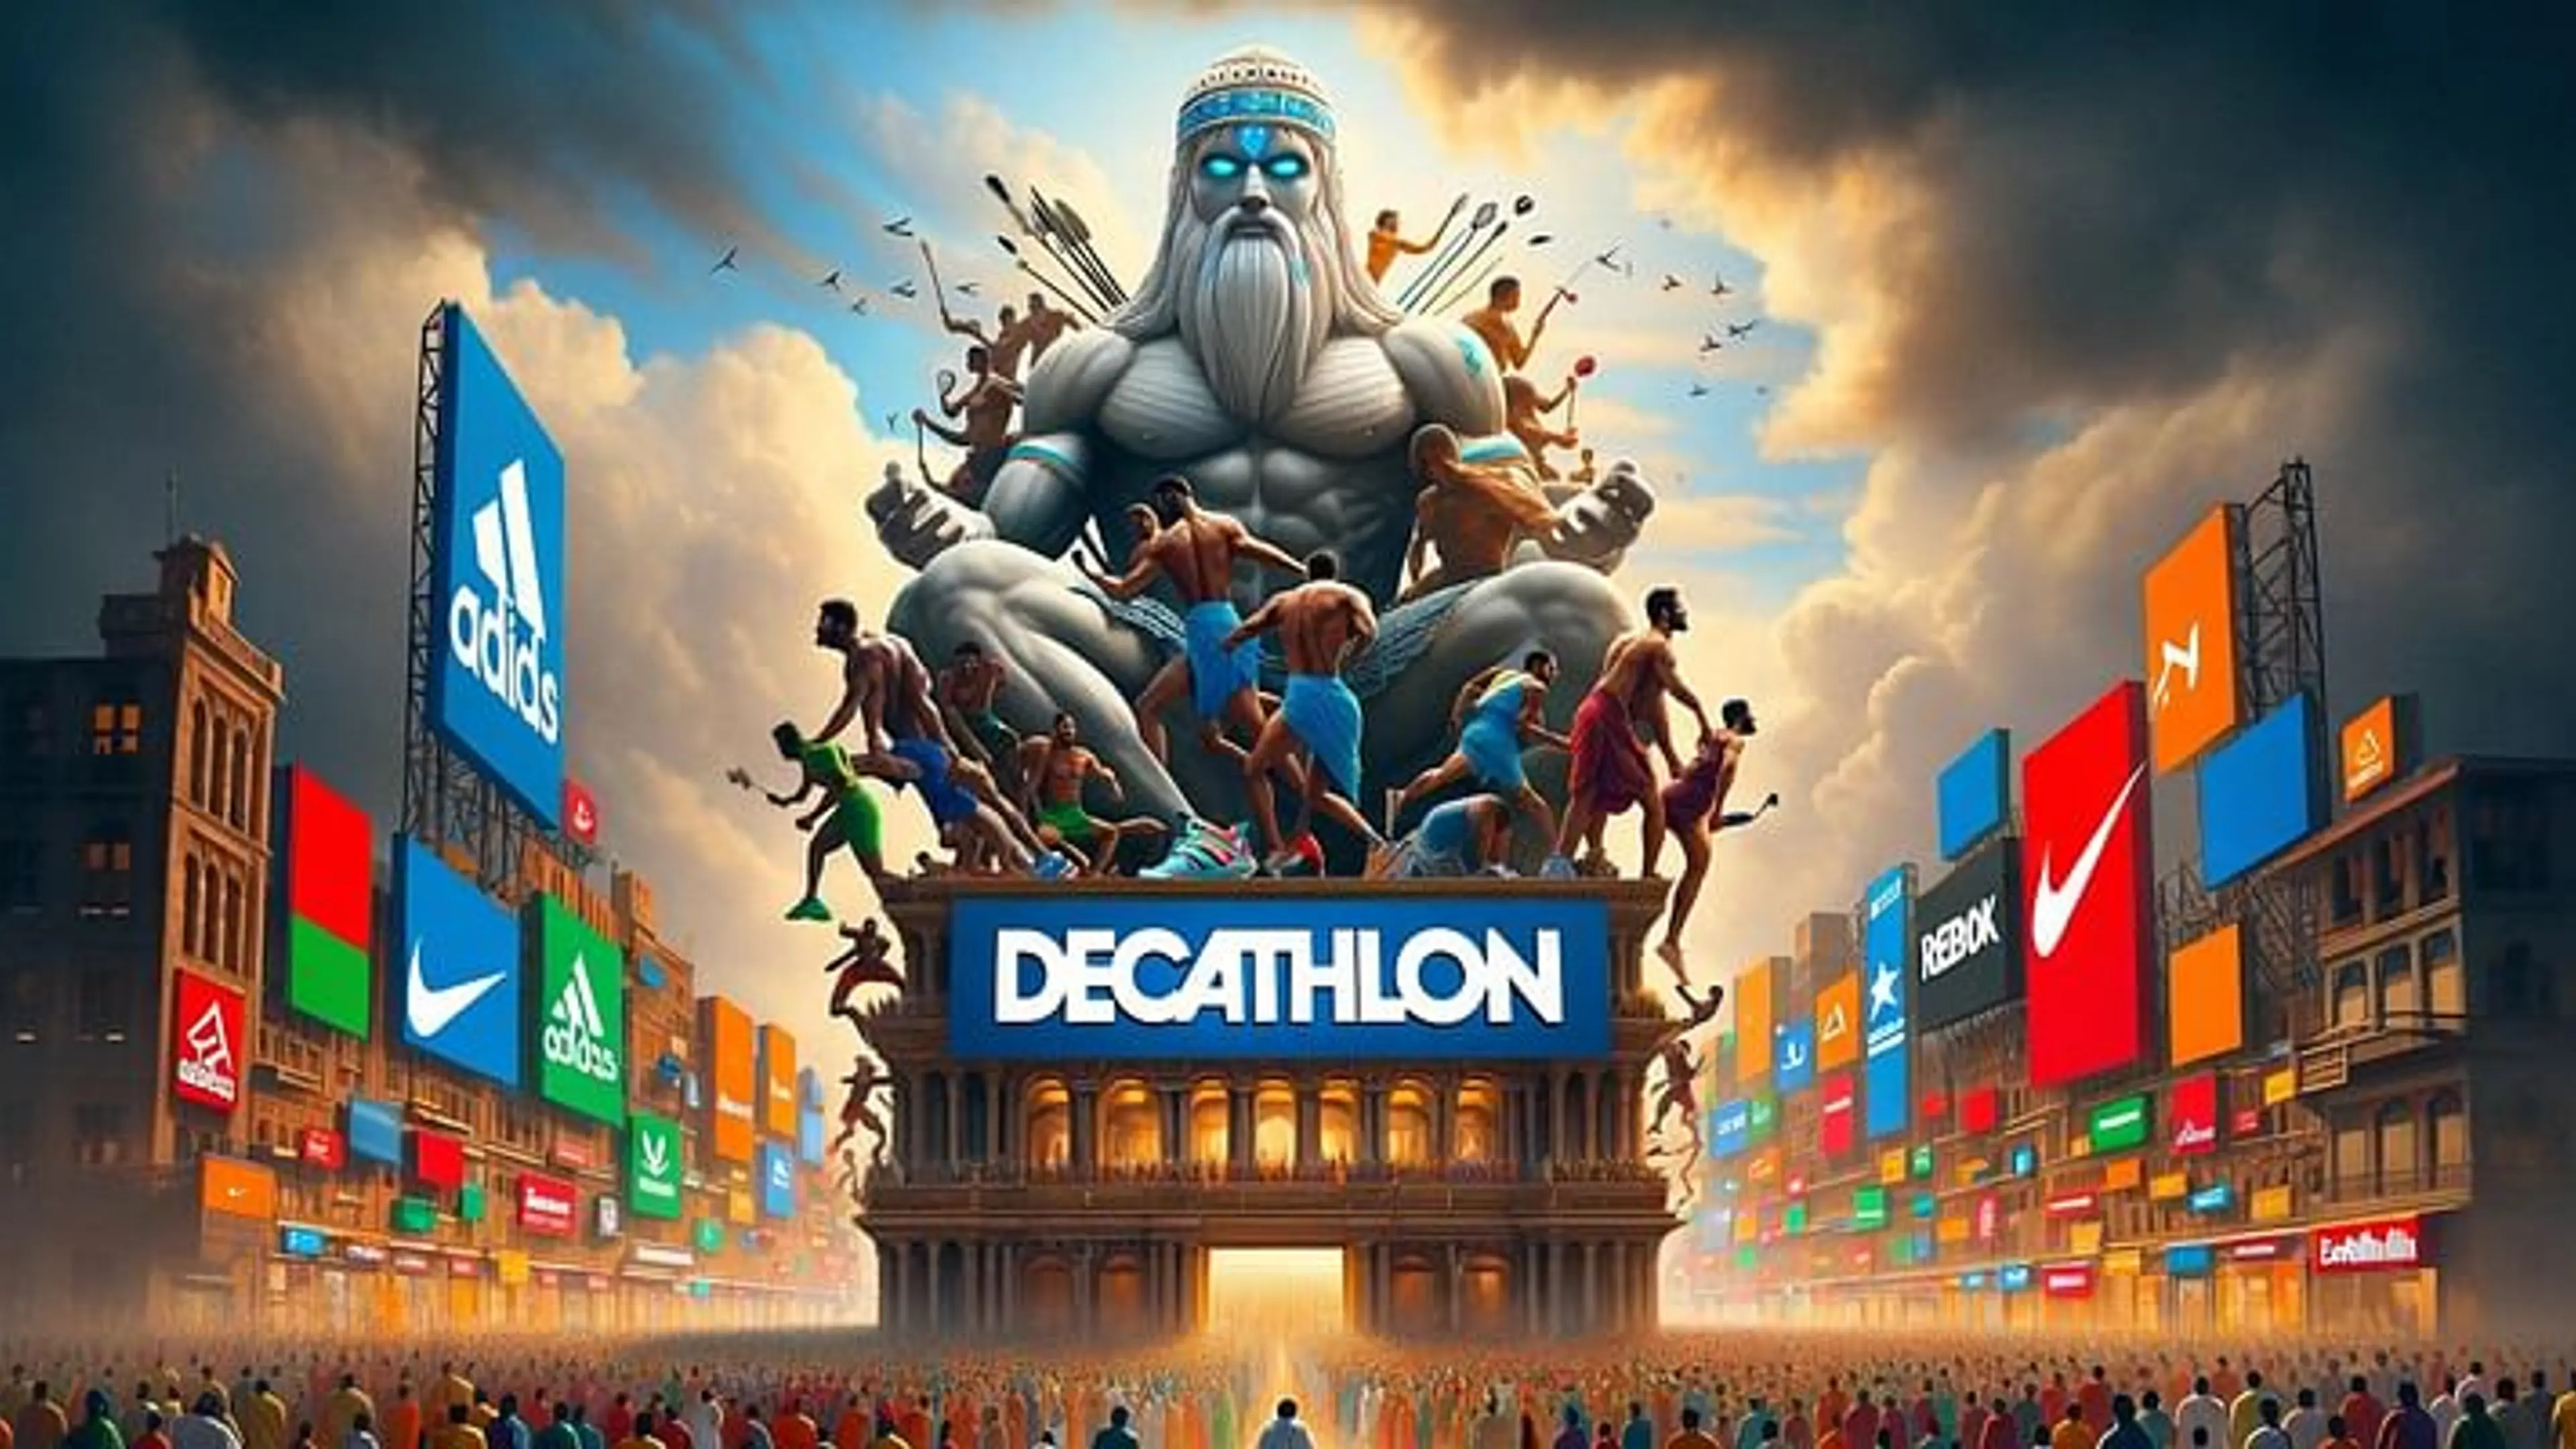 Decathlon: The Brand That Outplays Nike, Adidas, and Reebok Combined in India! Here's Why